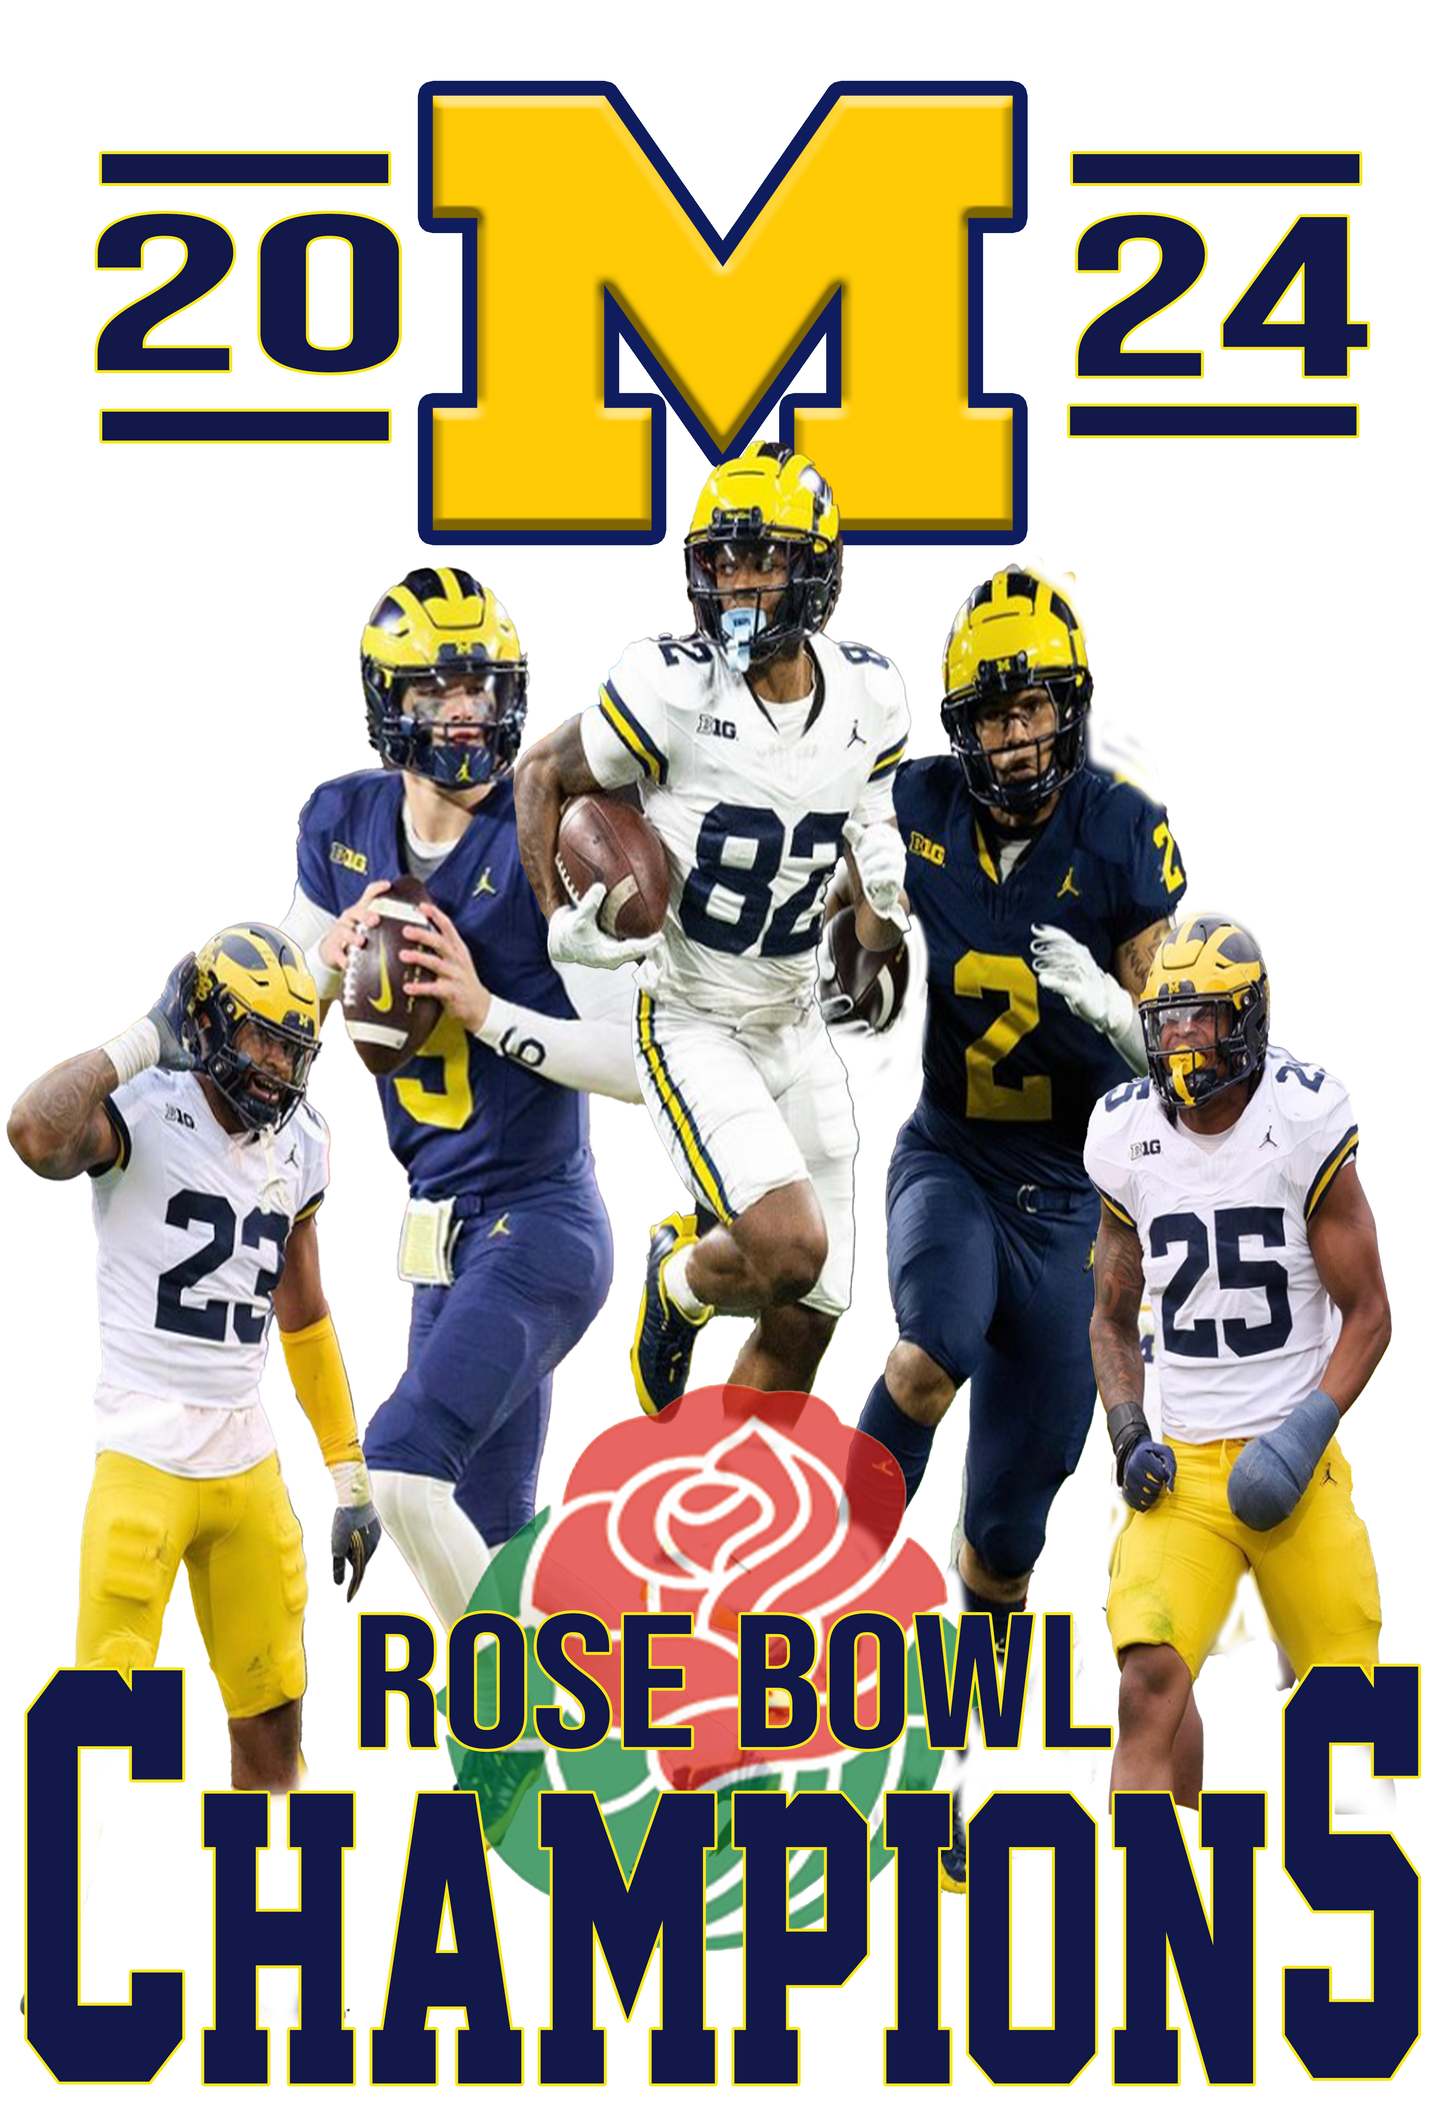 Wolverines Rose Bowl Champs T-Shirt